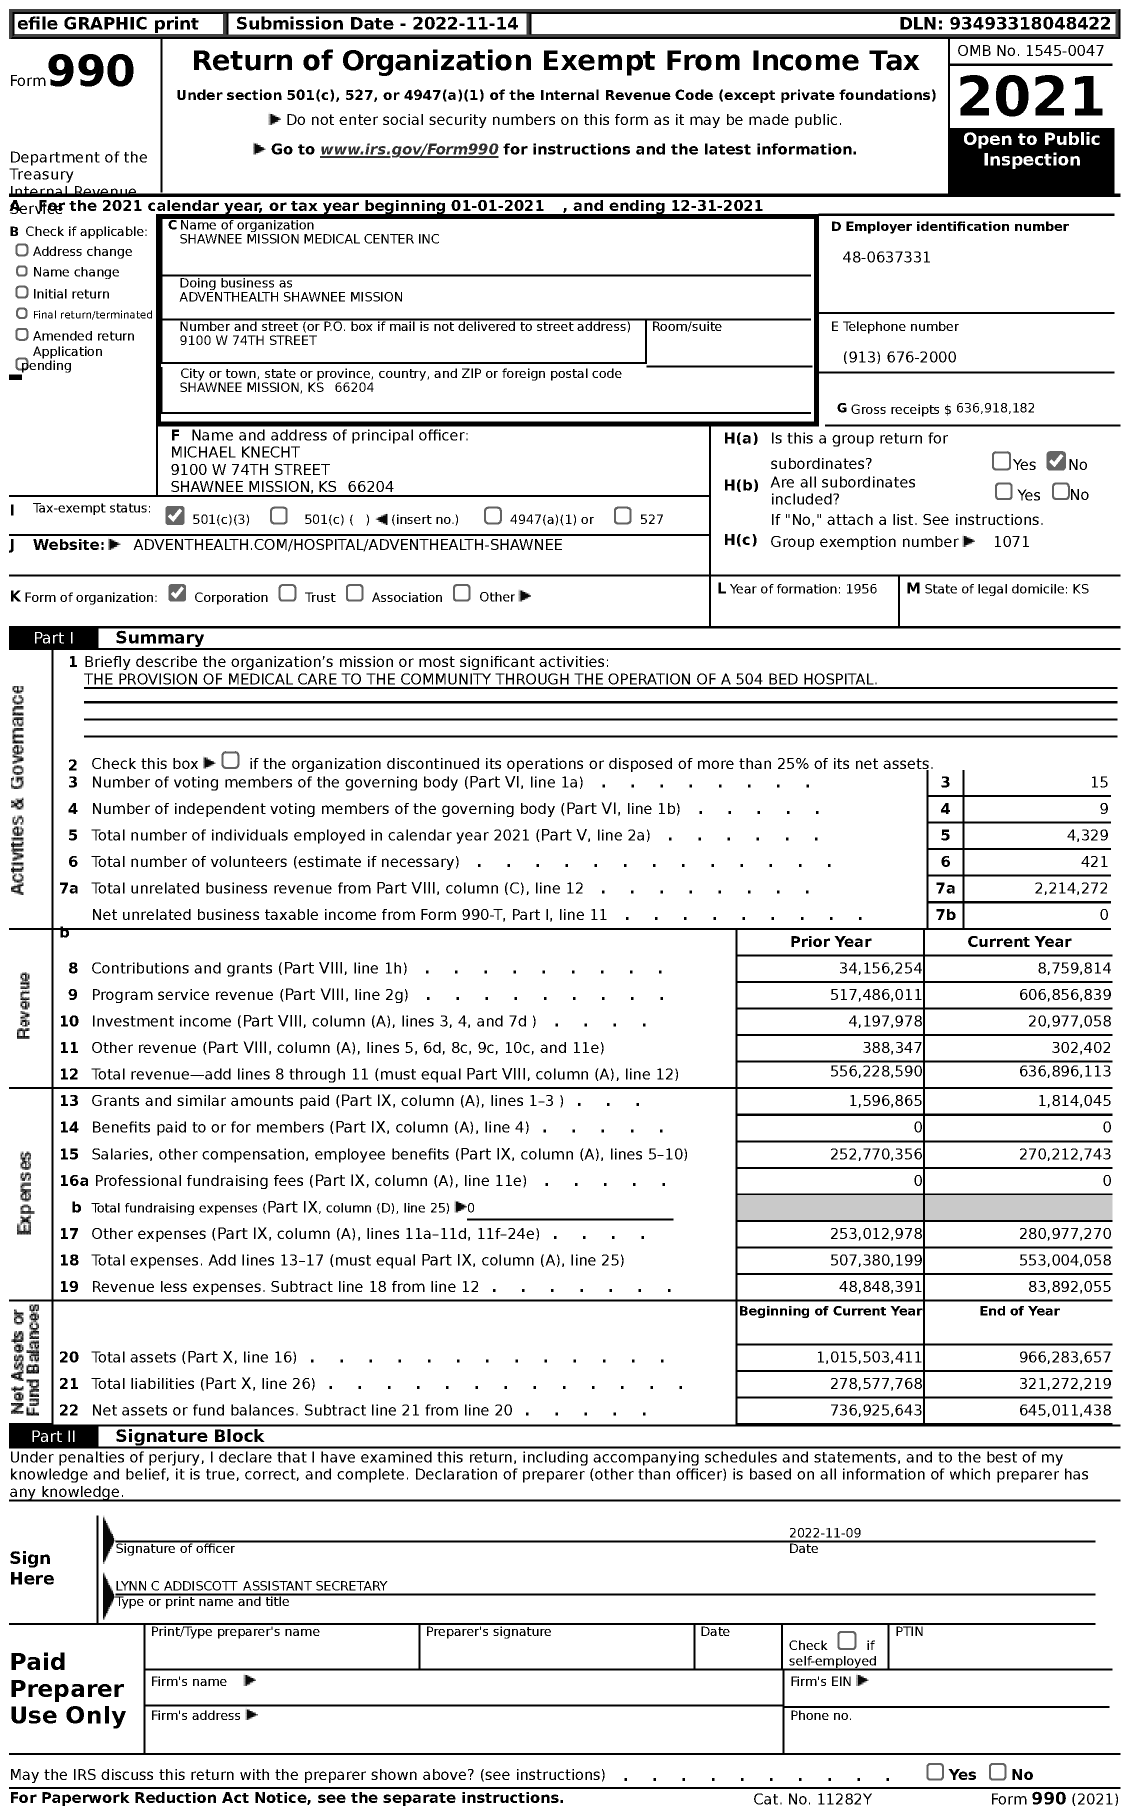 Image of first page of 2021 Form 990 for Adventhealth Shawnee Mission (SMH)